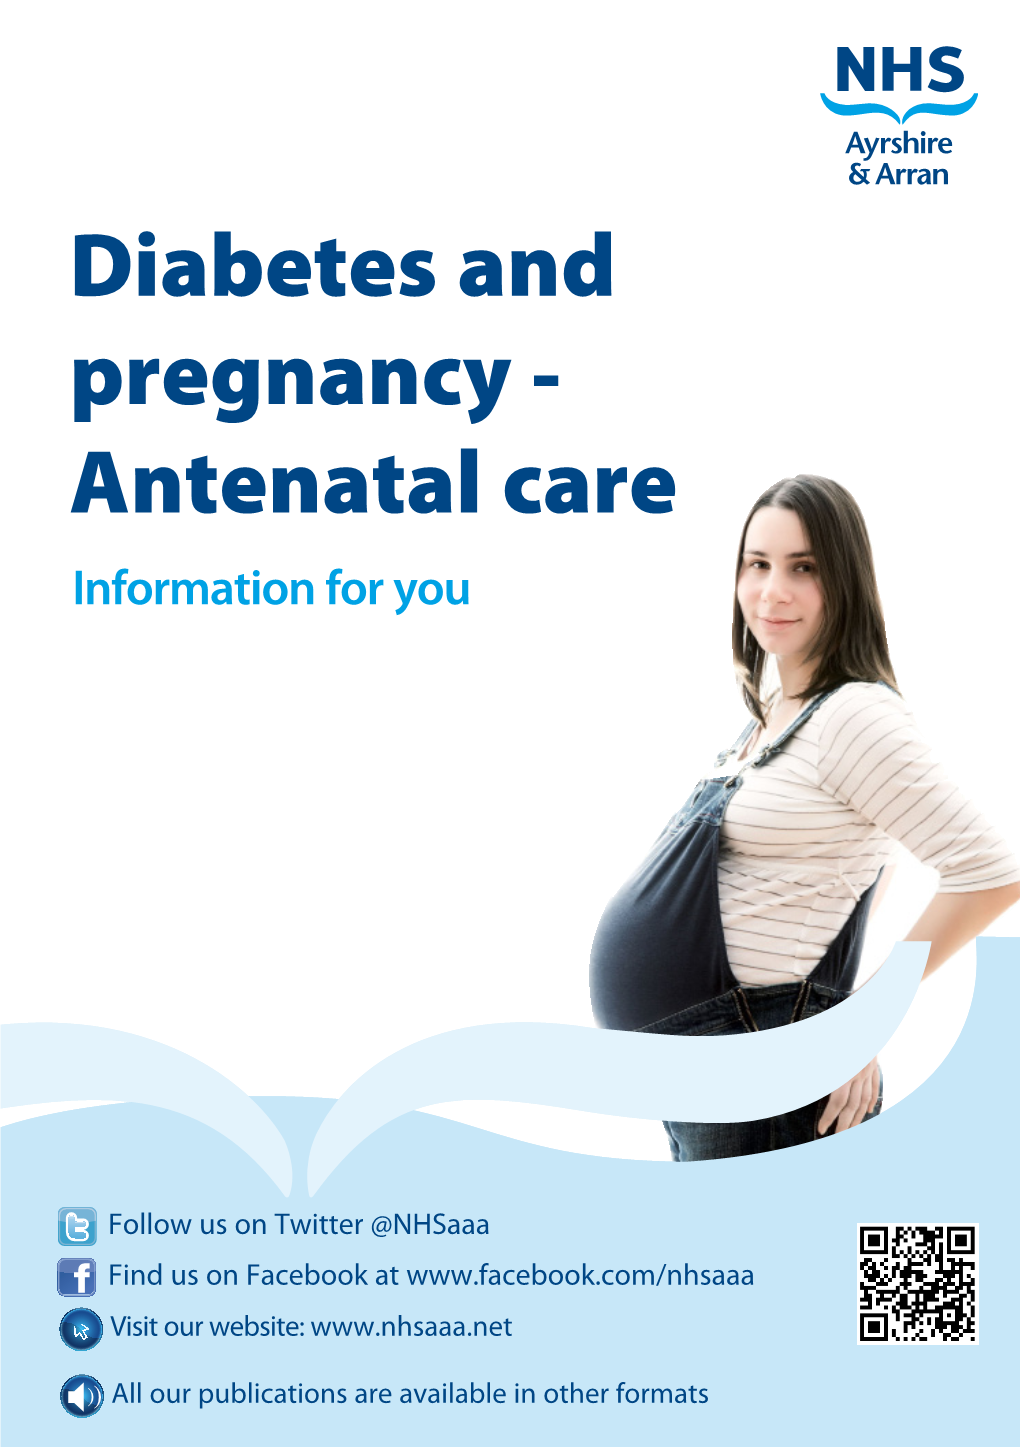 Diabetes and Pregnancy - Antenatal Care Information for You